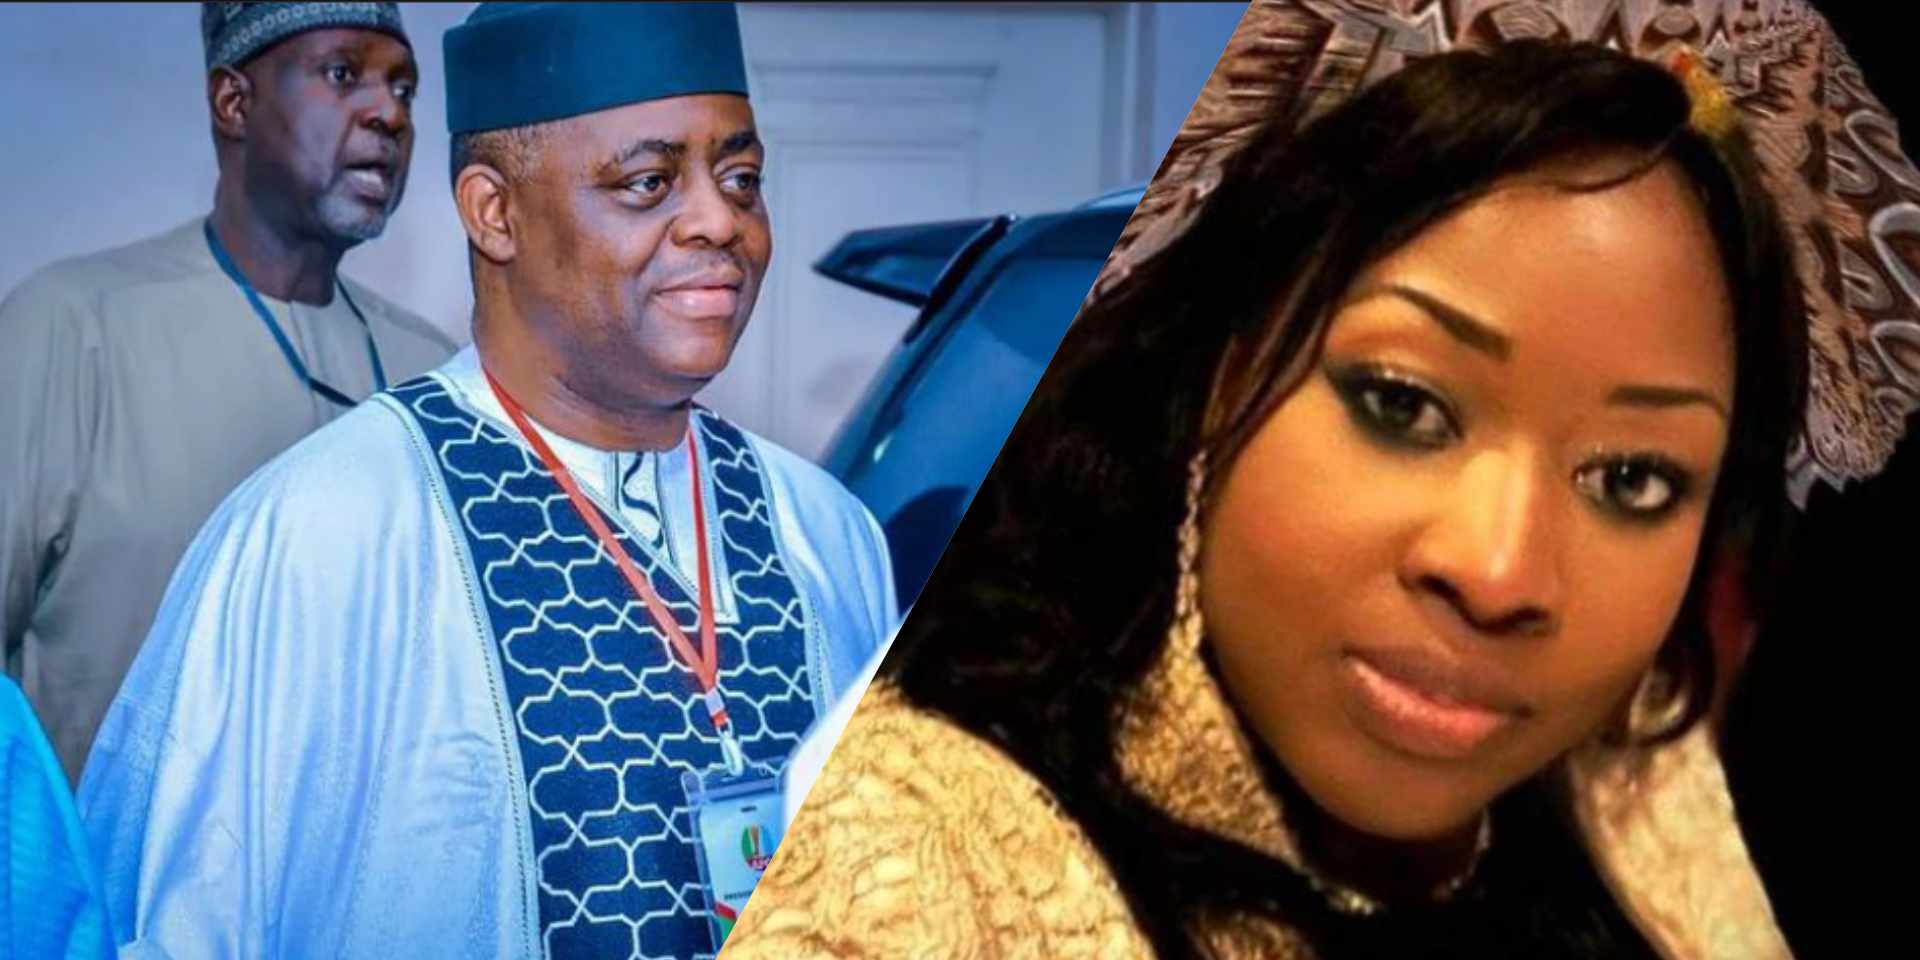 "The glory of my life" - FFK gushes over first wife hours after meeting ex-wife, Precious Chikwendu